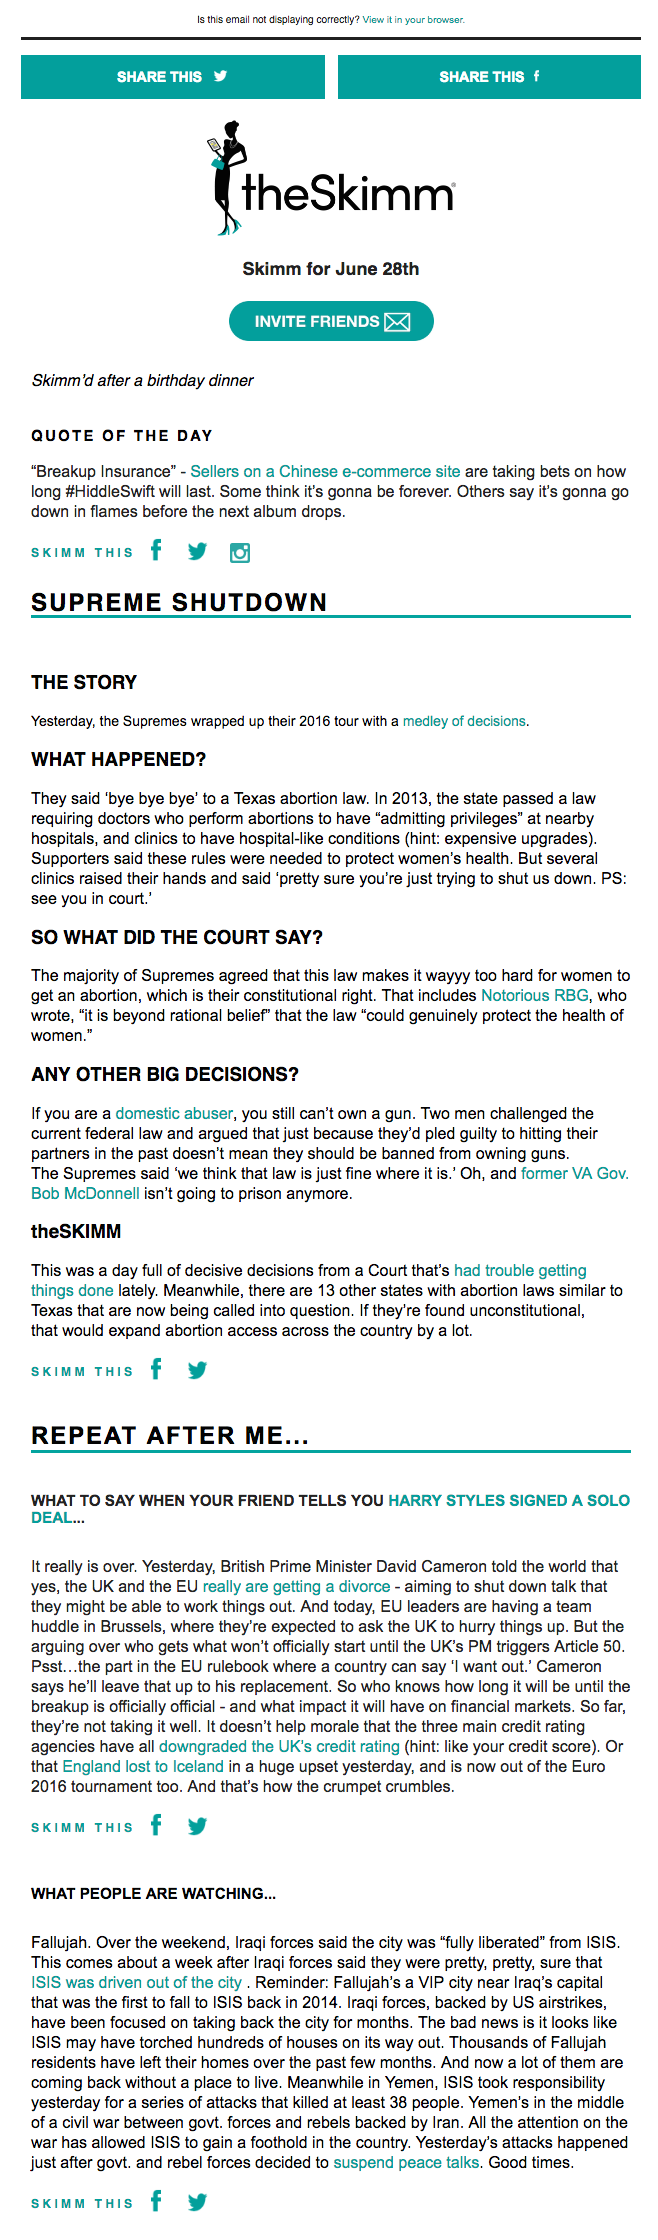 the-skimm-newsletter-example-1.png